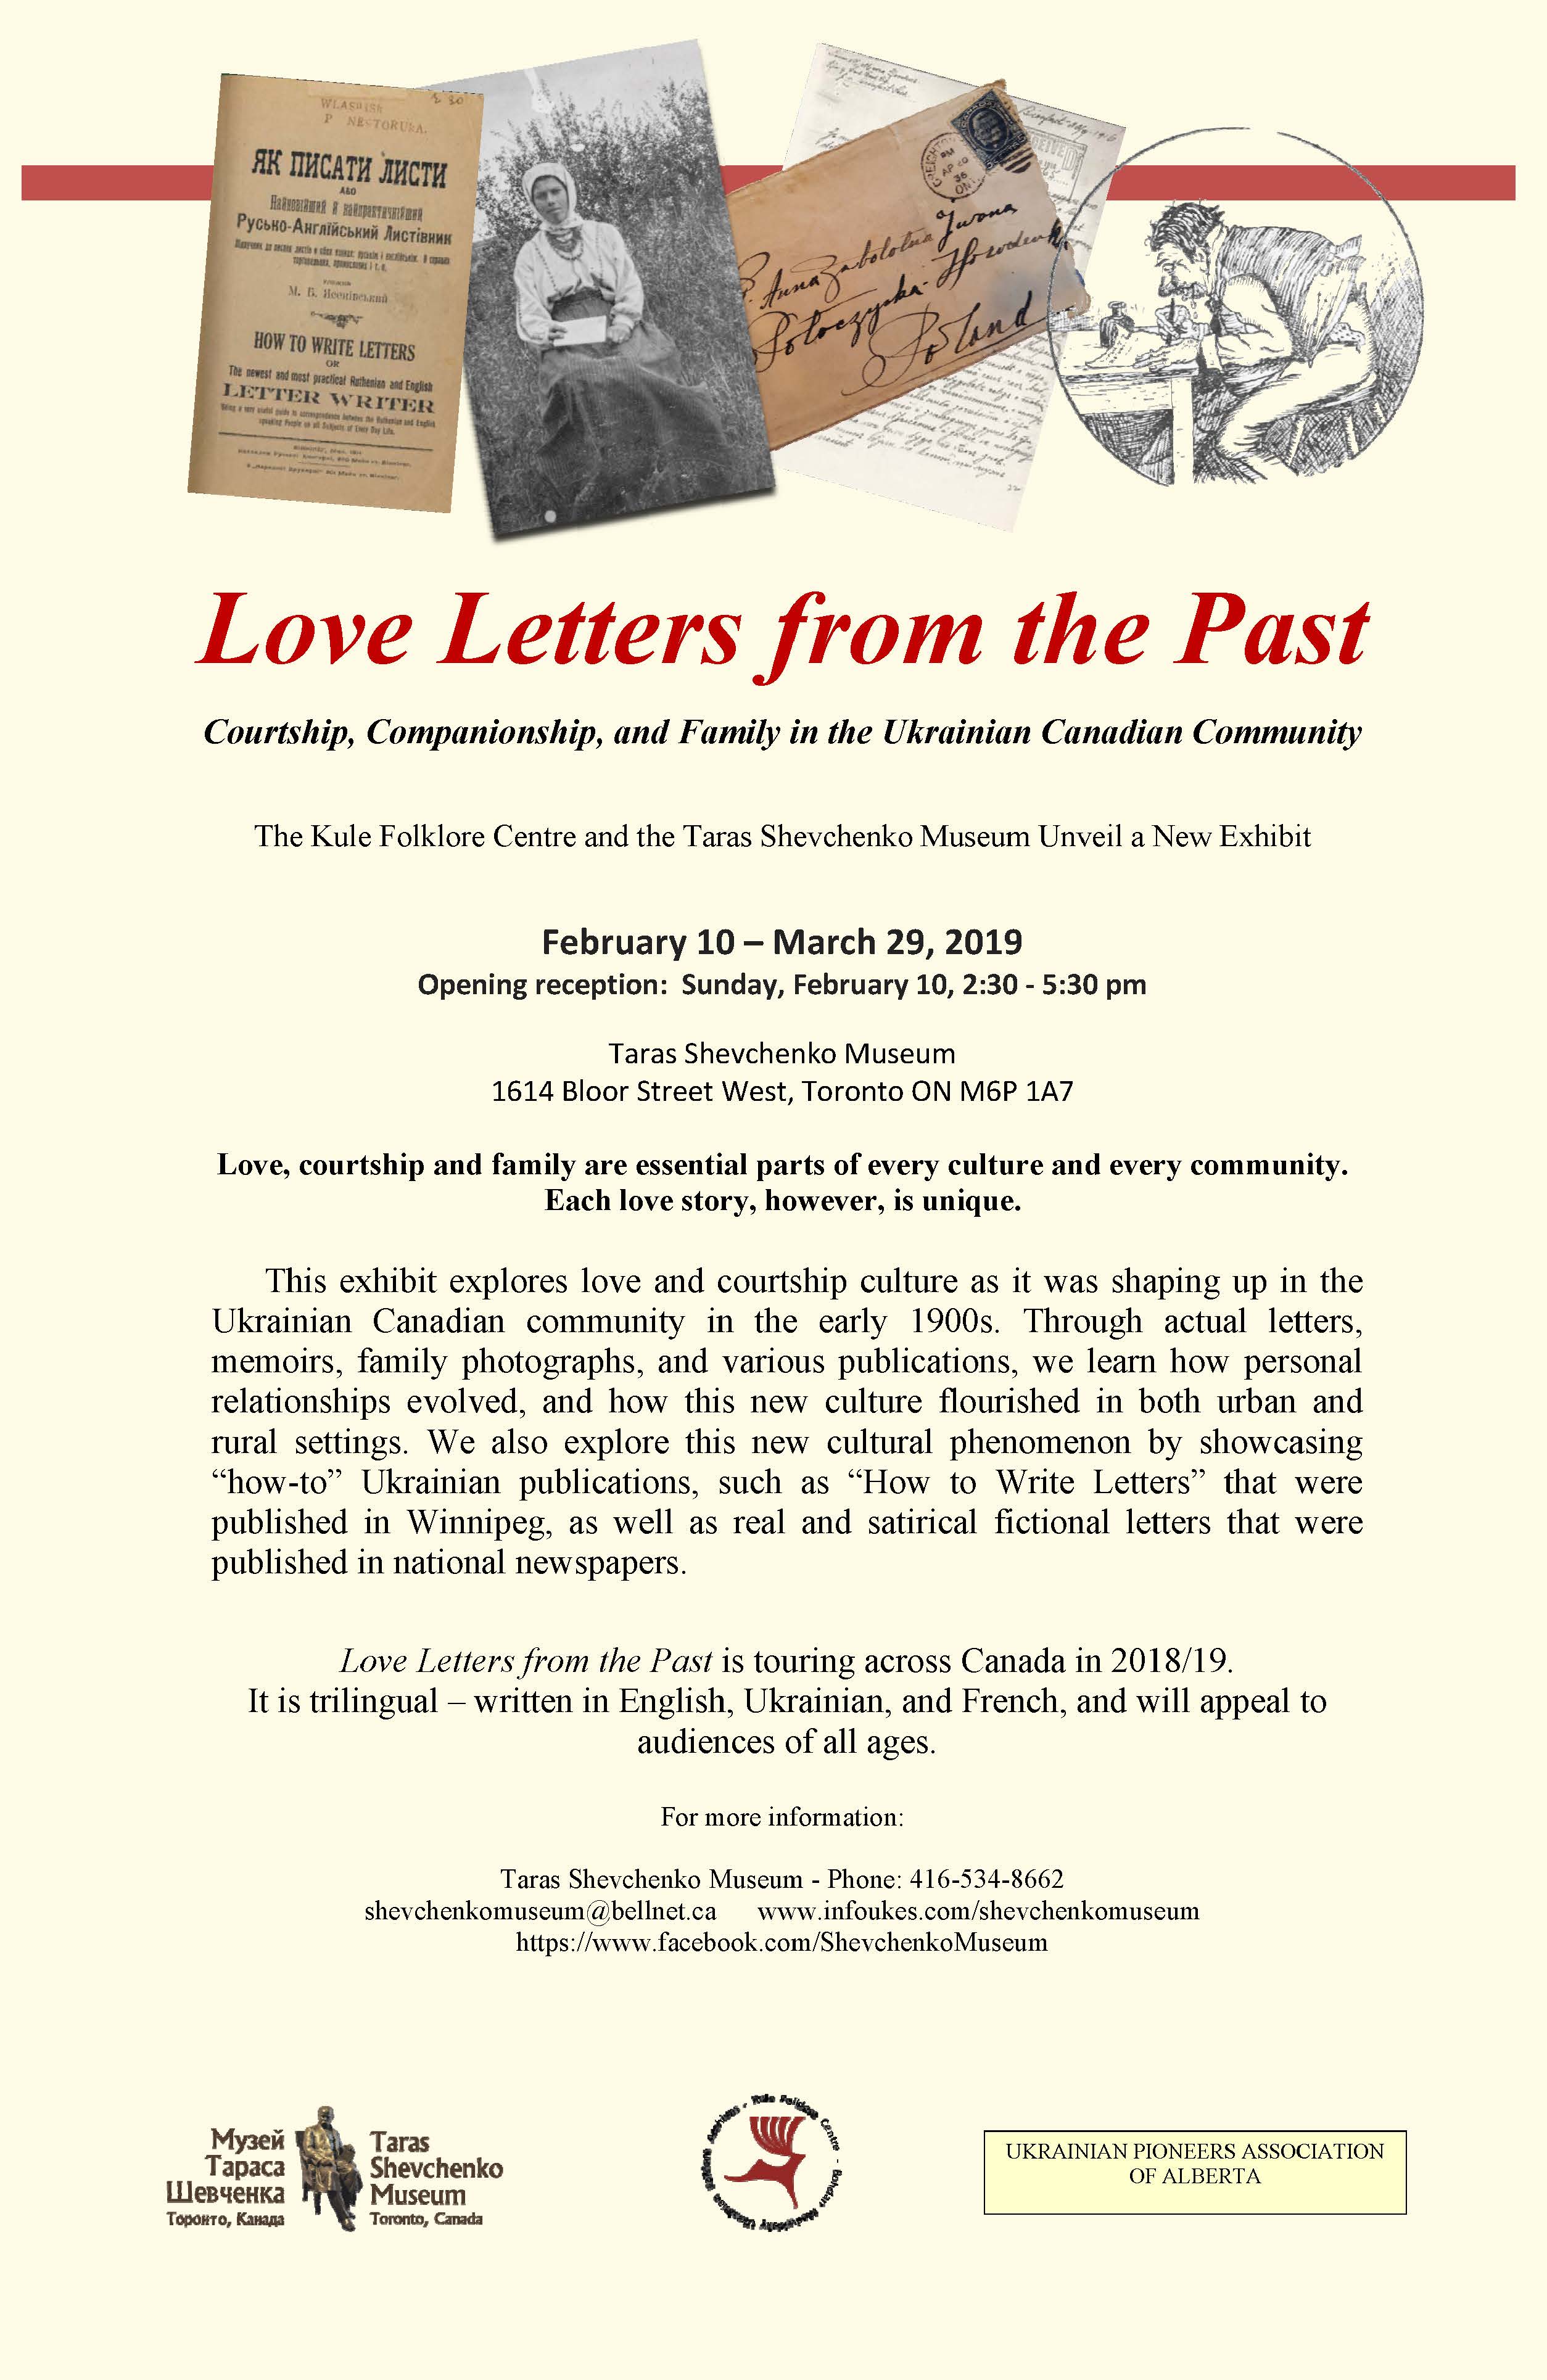 Love Letters of the Past Poster